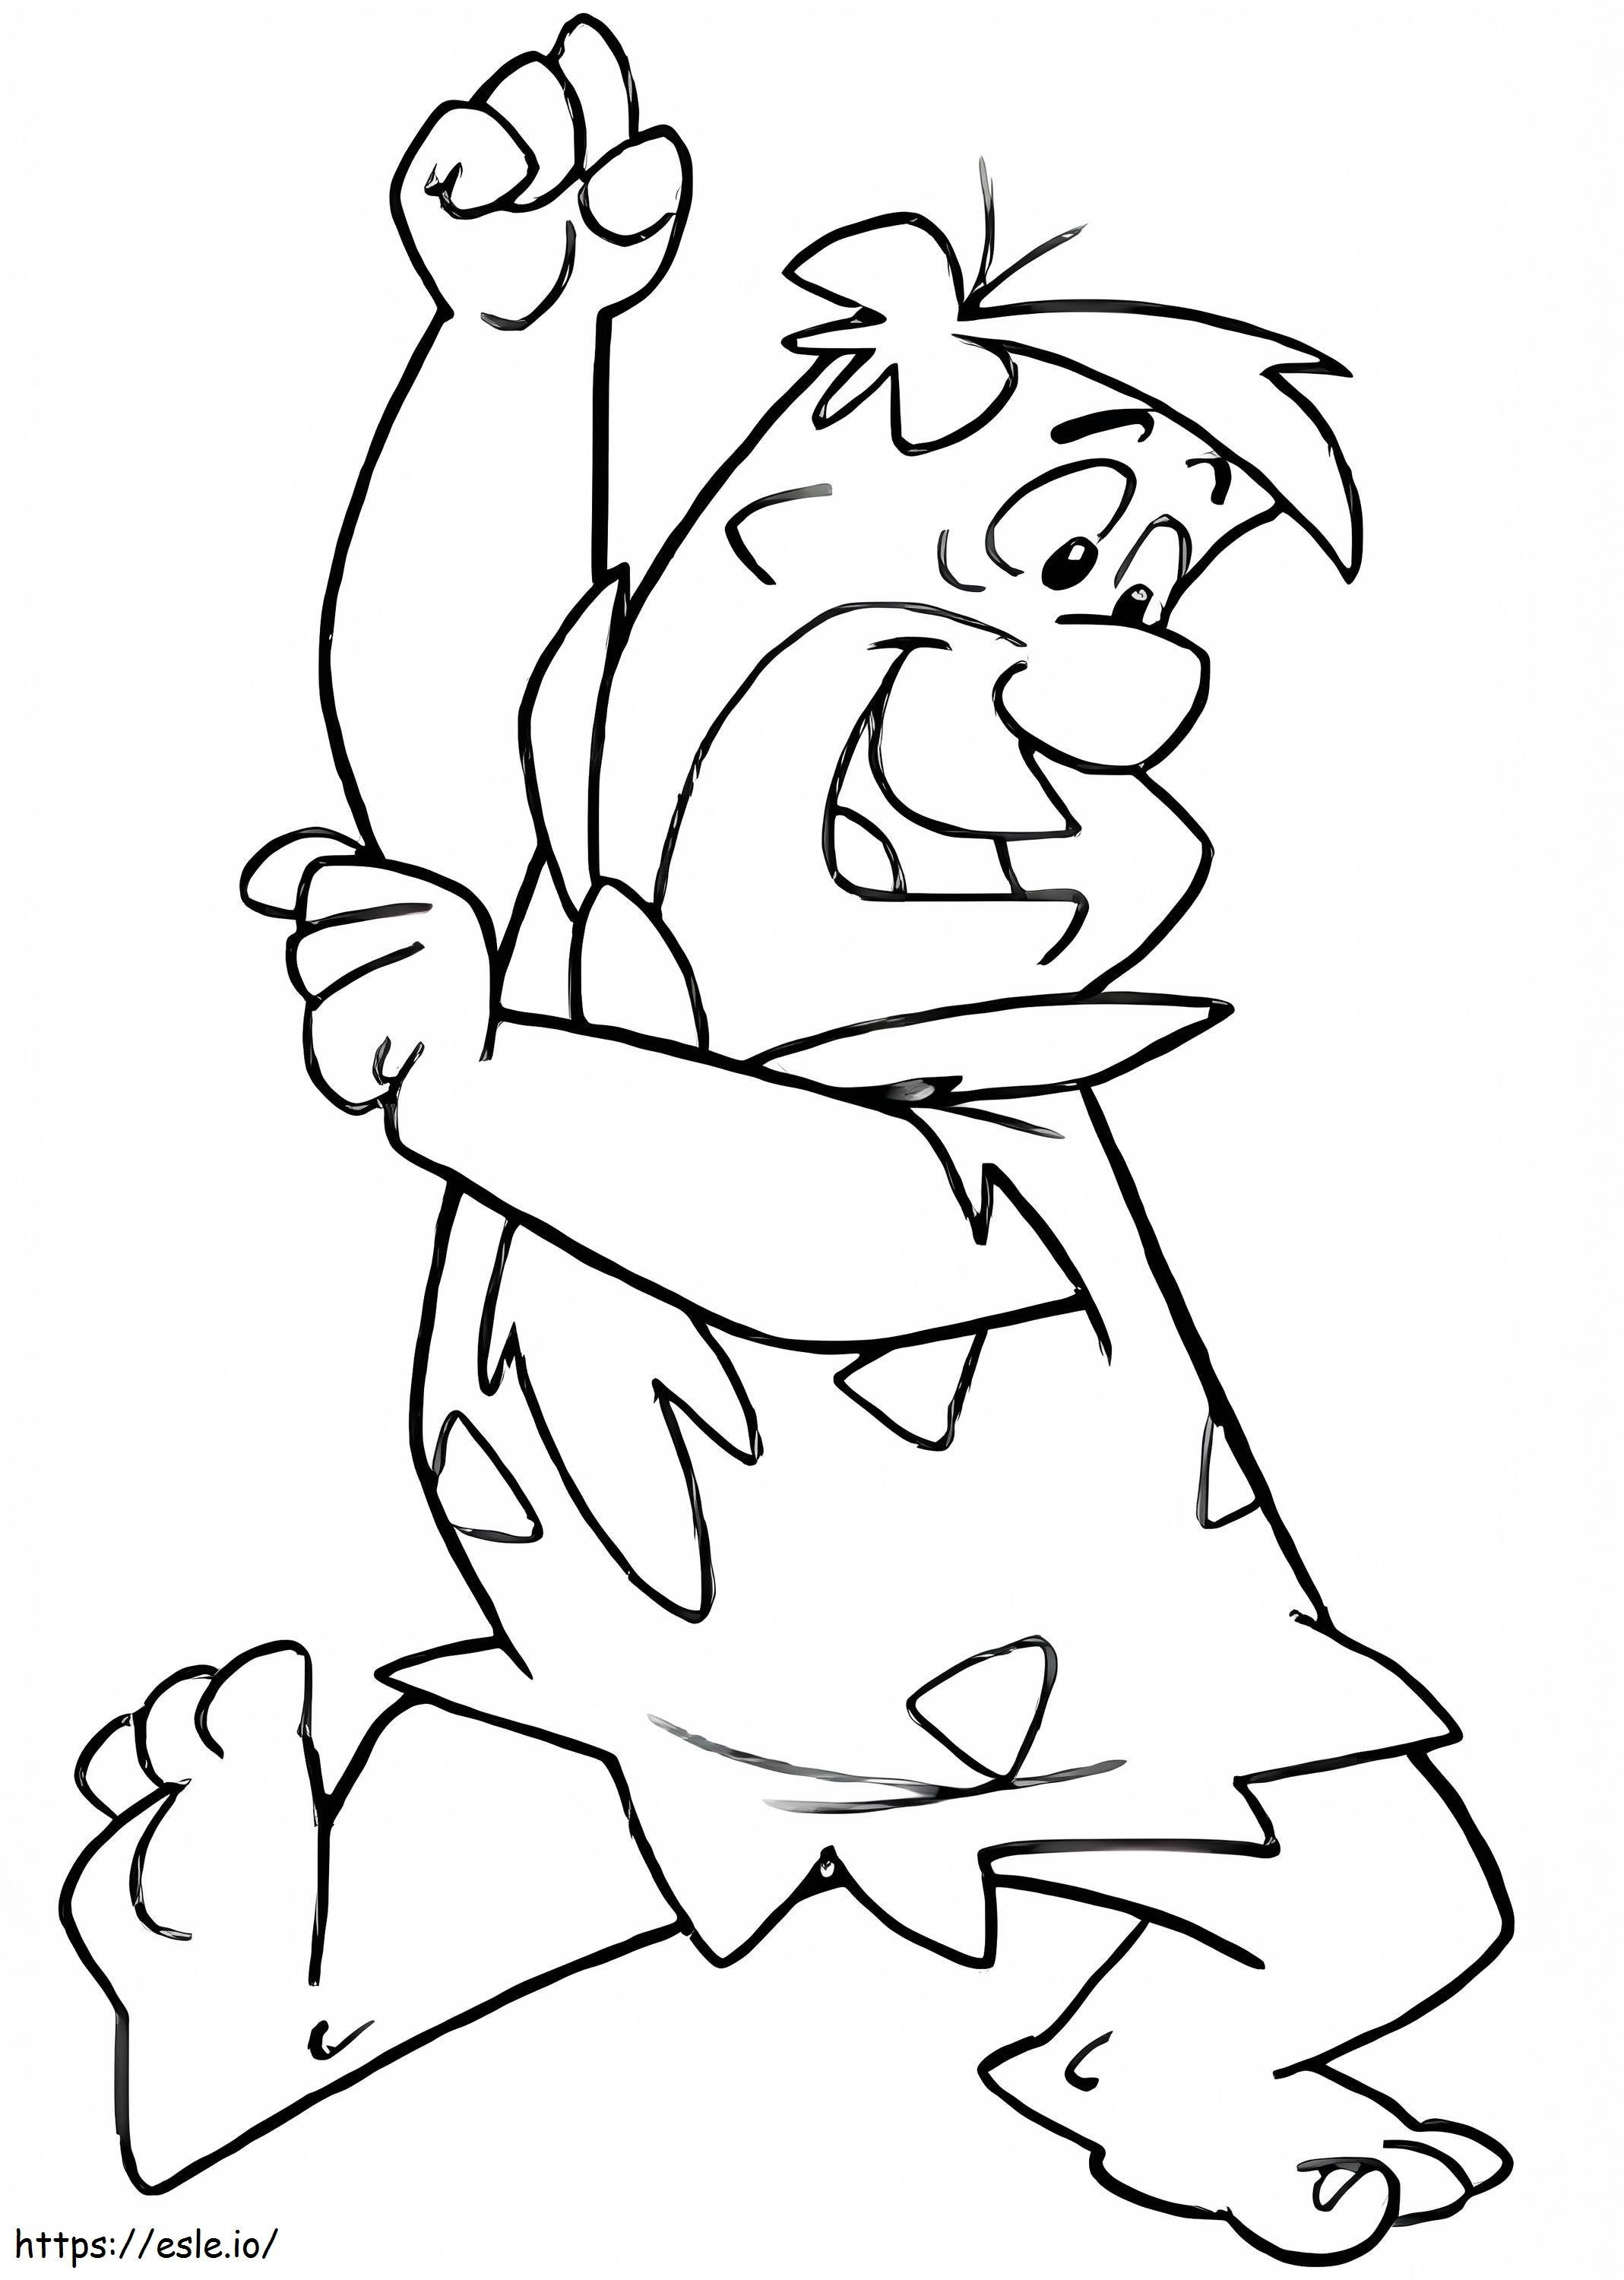 Fred Flintstone Dancing coloring page